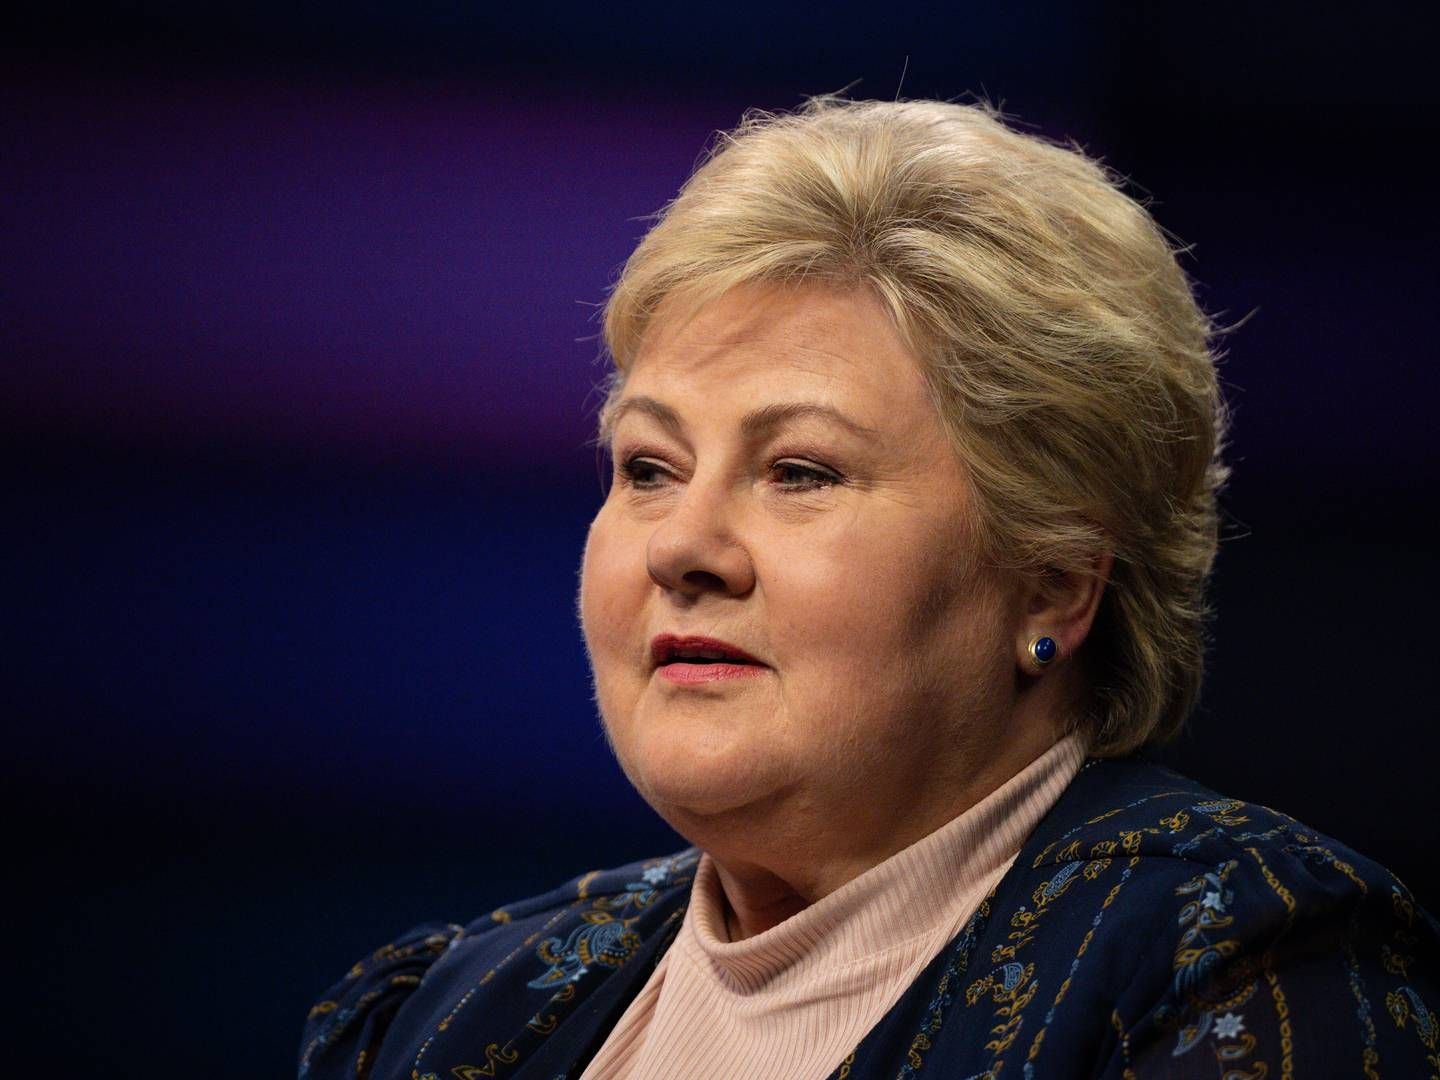 Erna Solberg conducted a marathon of interviews on Thursday last week to answer questions about her husband's share trading and her impartiality. Here from the live debate program "Debatten" on the Norwegian state channel NRK. | Foto: Beate Oma Dahle/NTB/Ritzau Scanpix